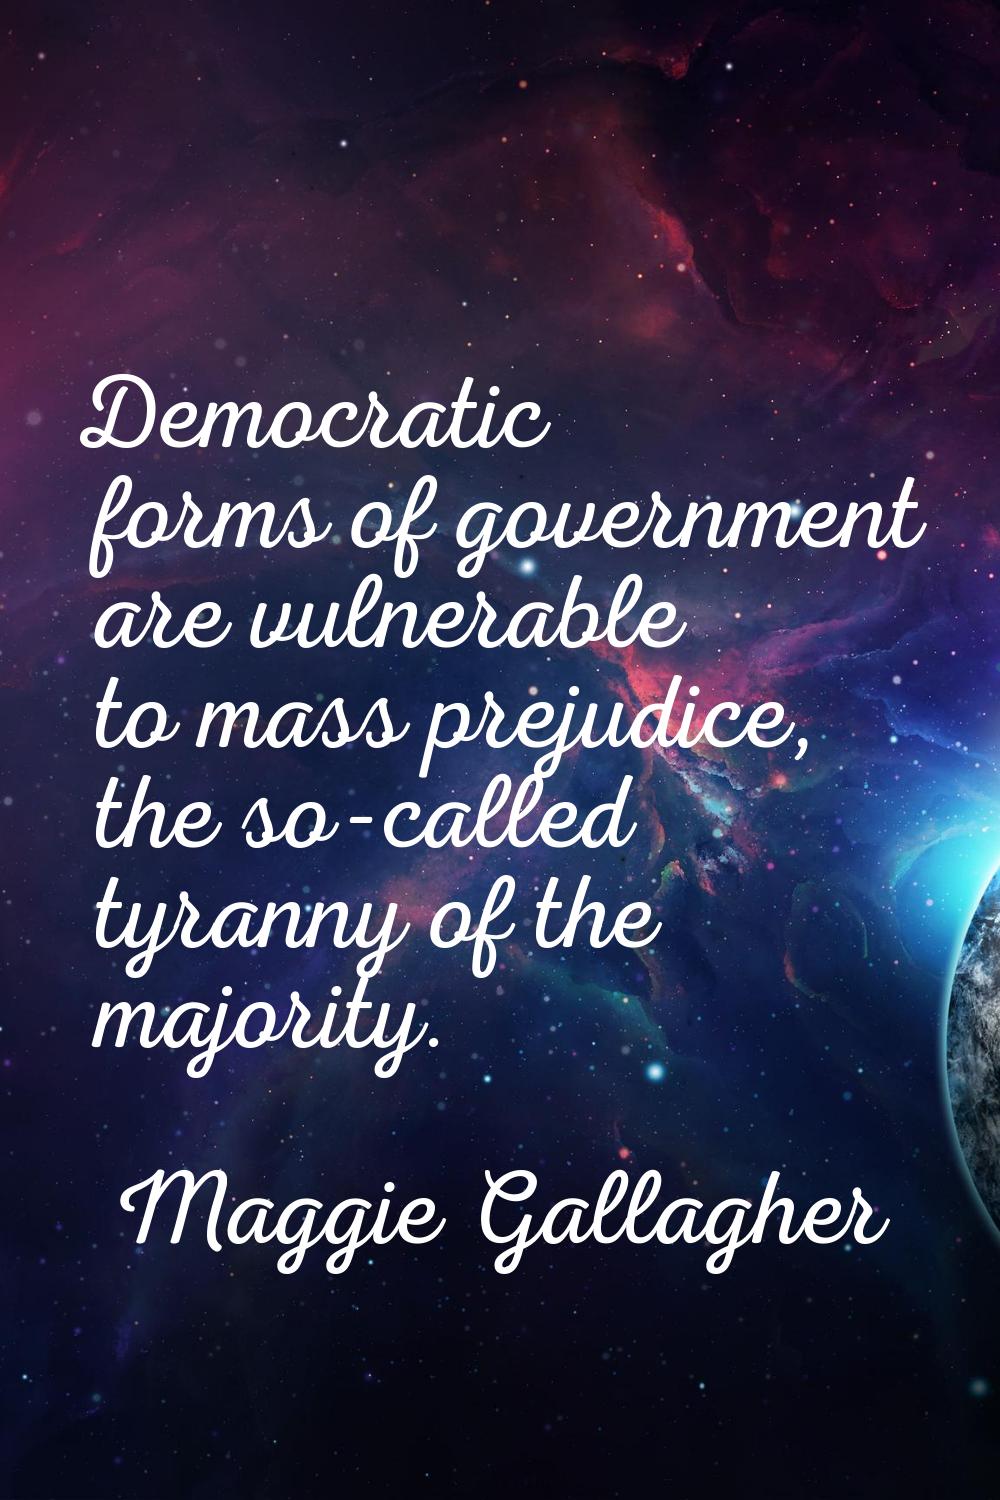 Democratic forms of government are vulnerable to mass prejudice, the so-called tyranny of the major